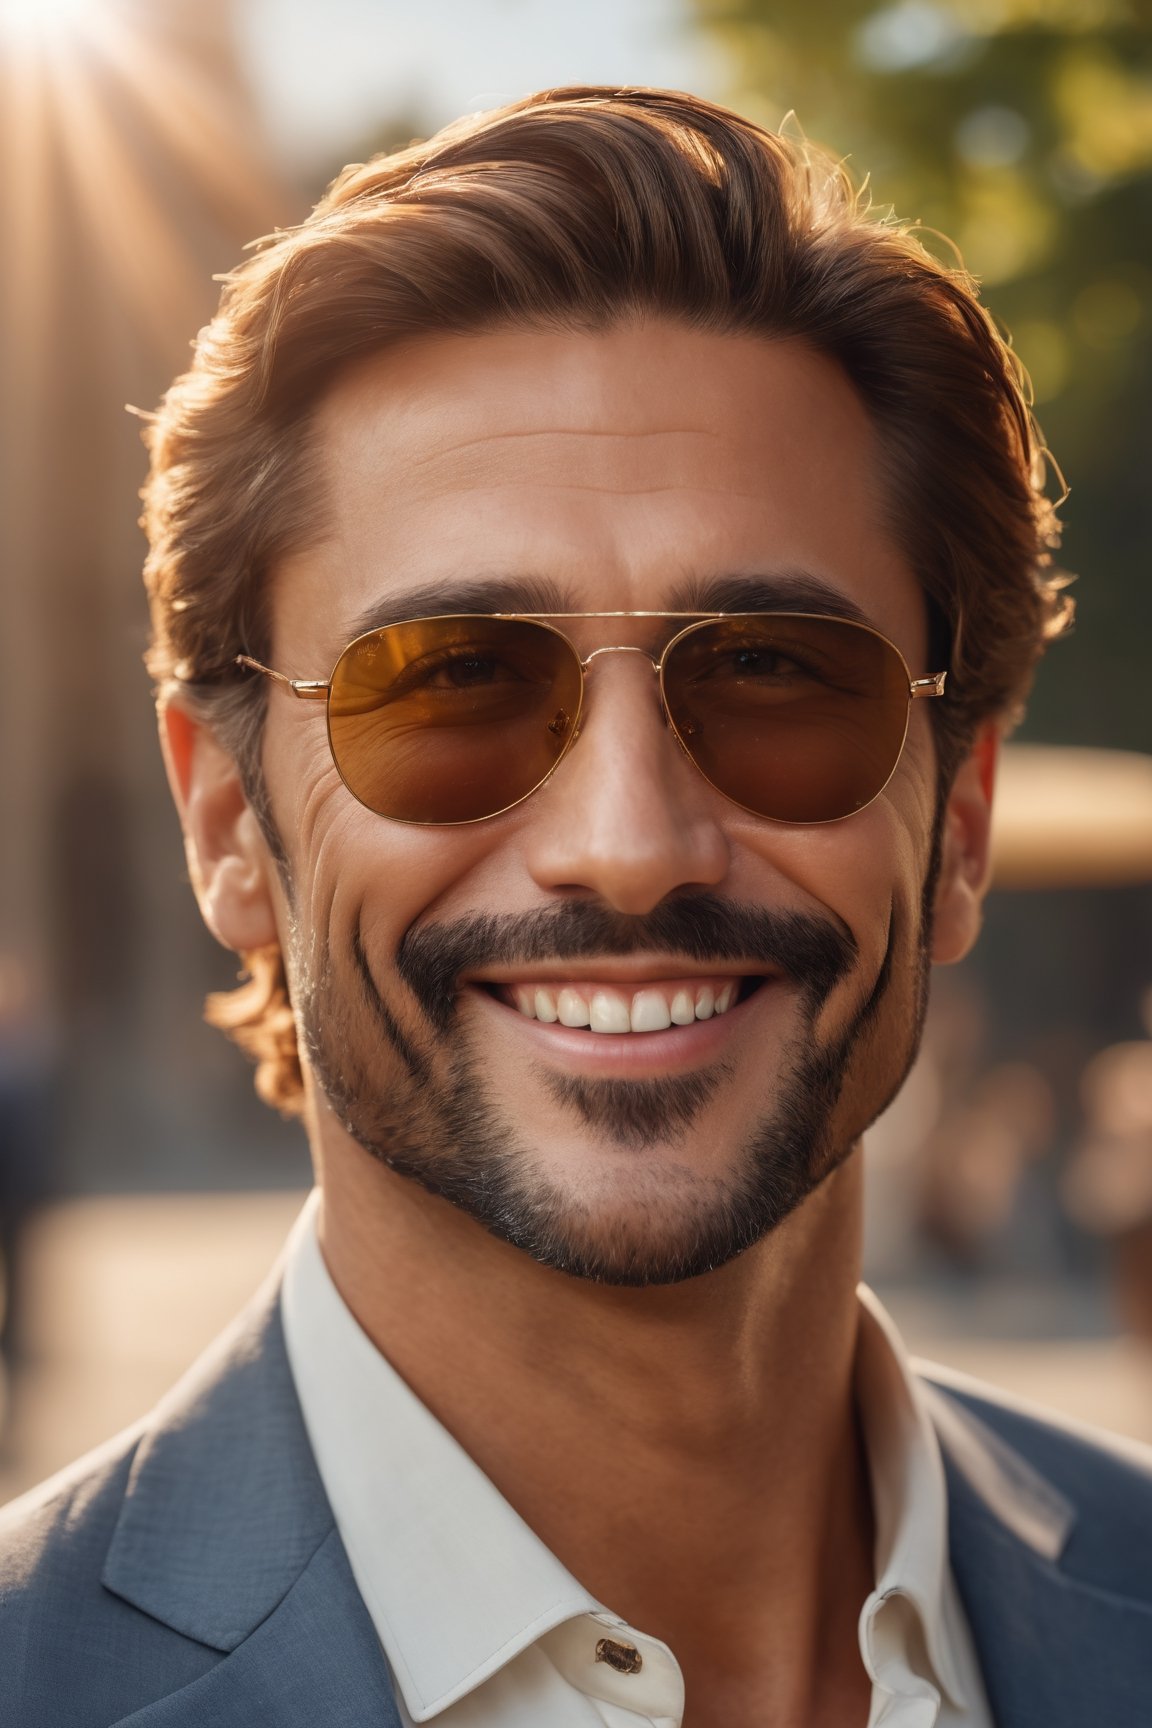 (best quality,8K,highres,masterpiece), ultra-detailed, (photo-realistic, lifelike) close-up portrait of a man with a warm smile, stylish sunglasses, and a relaxed outdoor ambiance. The cinematic lighting adds depth and character to this outdoor photo-realistic masterpiece.